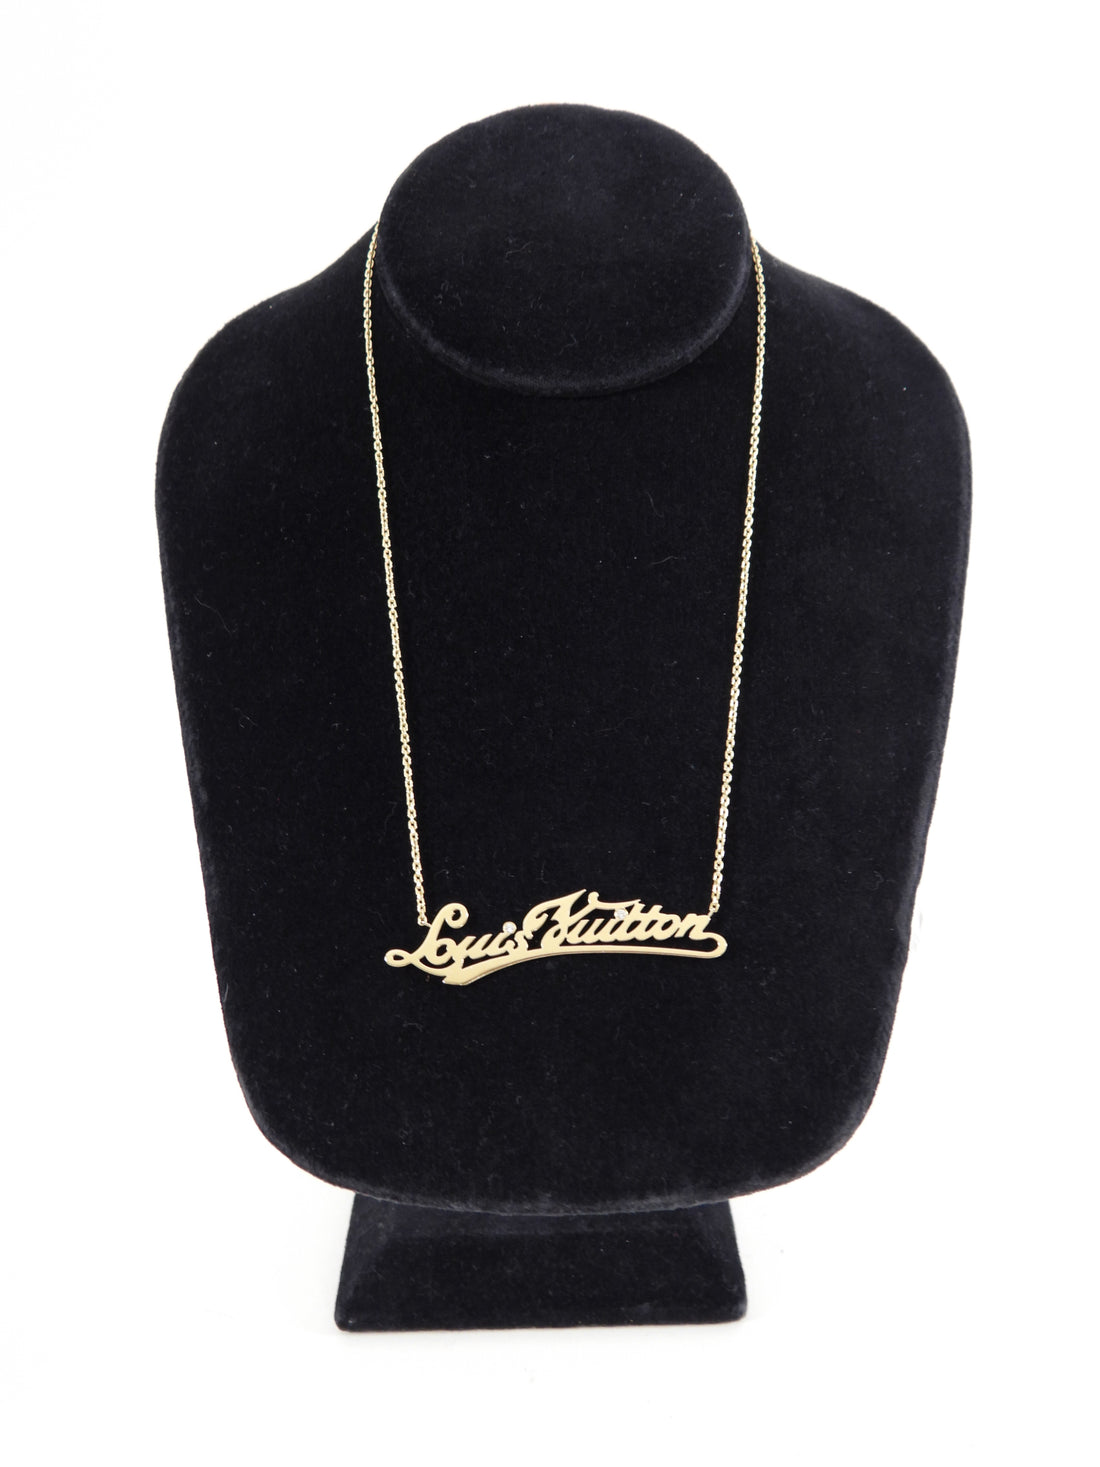 Louis Vuitton Gold and Diamond Nameplate Necklace